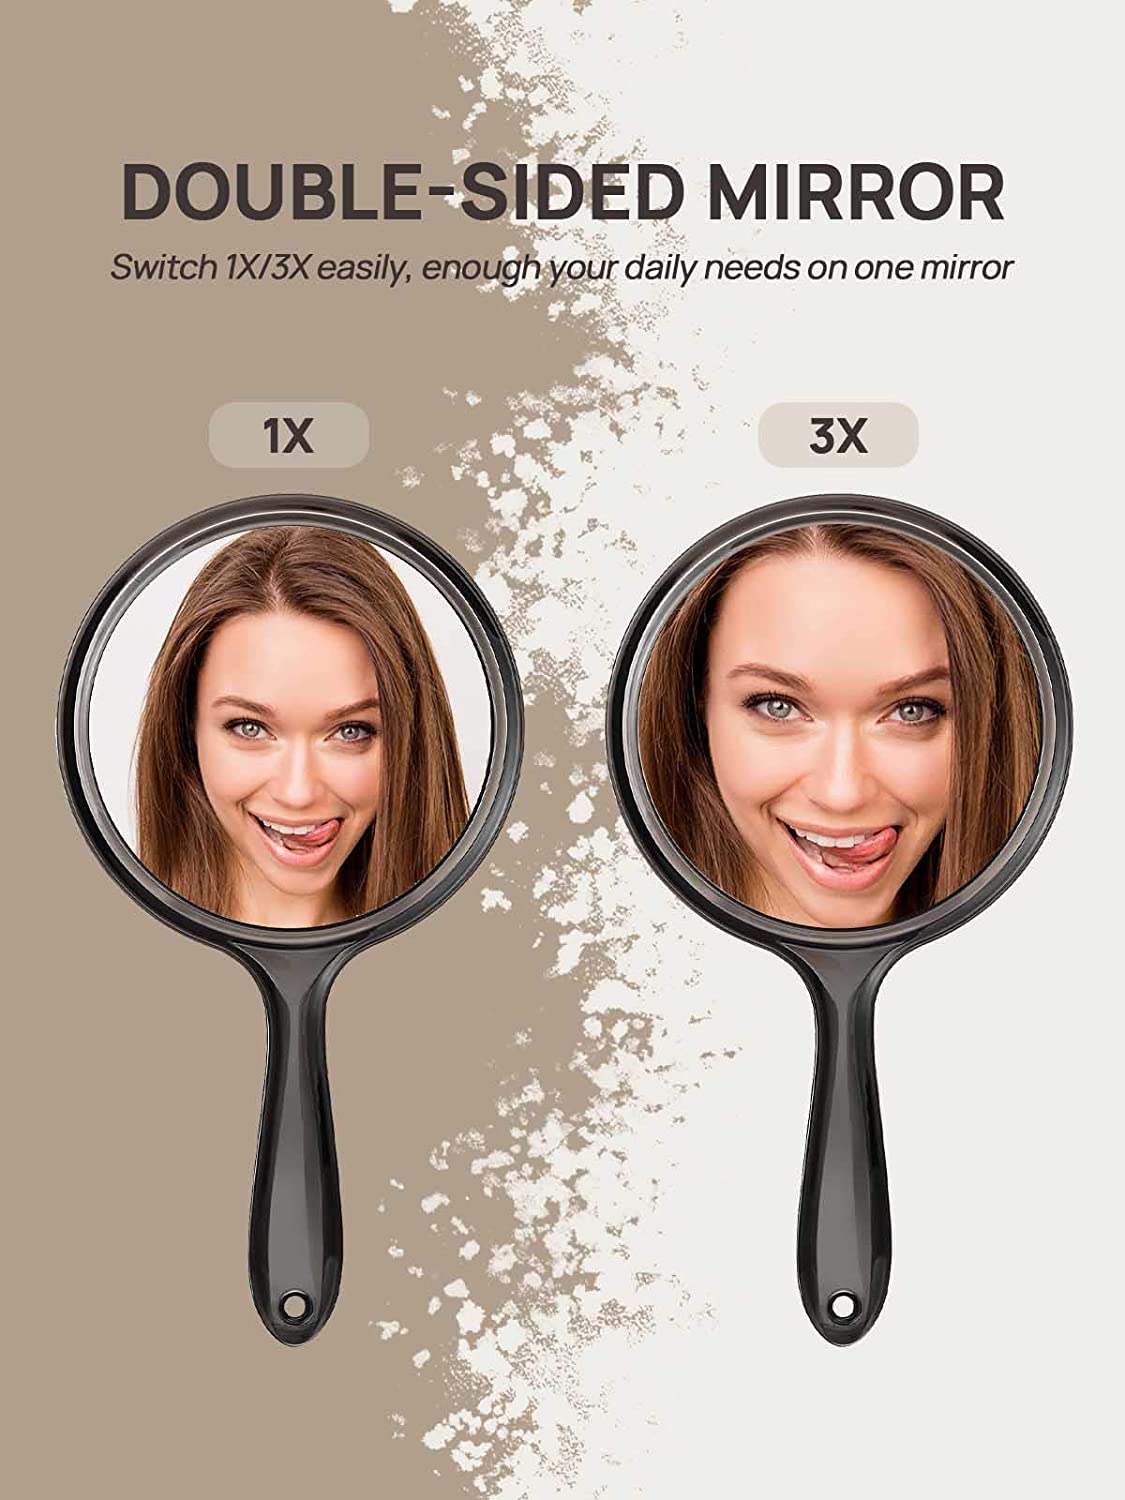 OMIRO Hand Mirror, Double-Sided Handheld Mirror 1X/3X Magnifying Mirror with Handle, Set of 2 (Transparent Black)